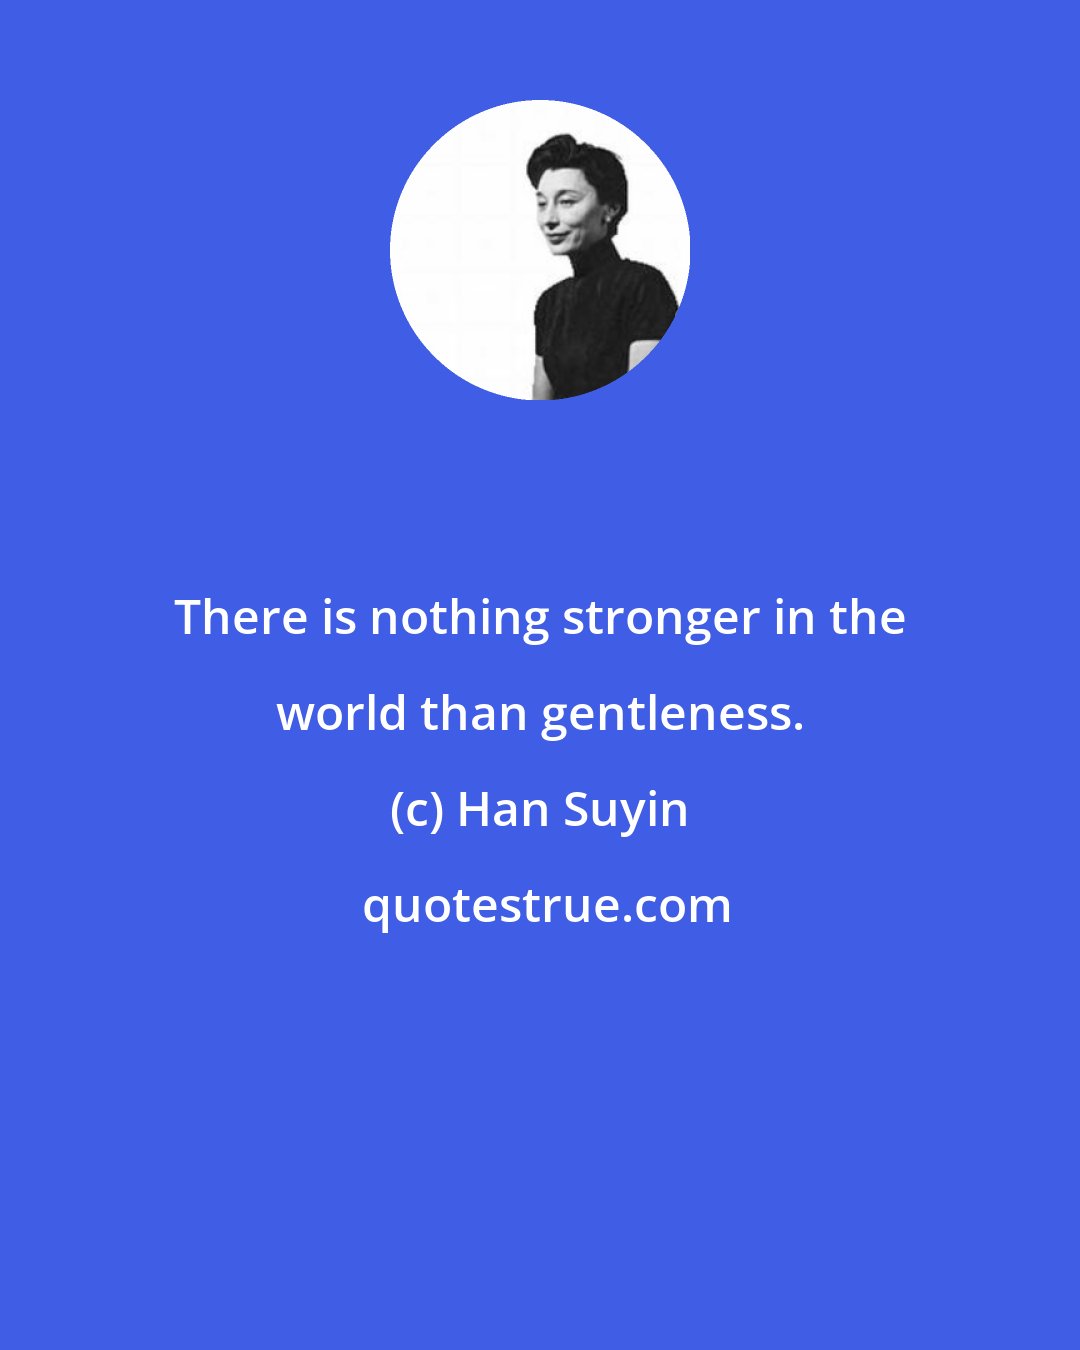 Han Suyin: There is nothing stronger in the world than gentleness.